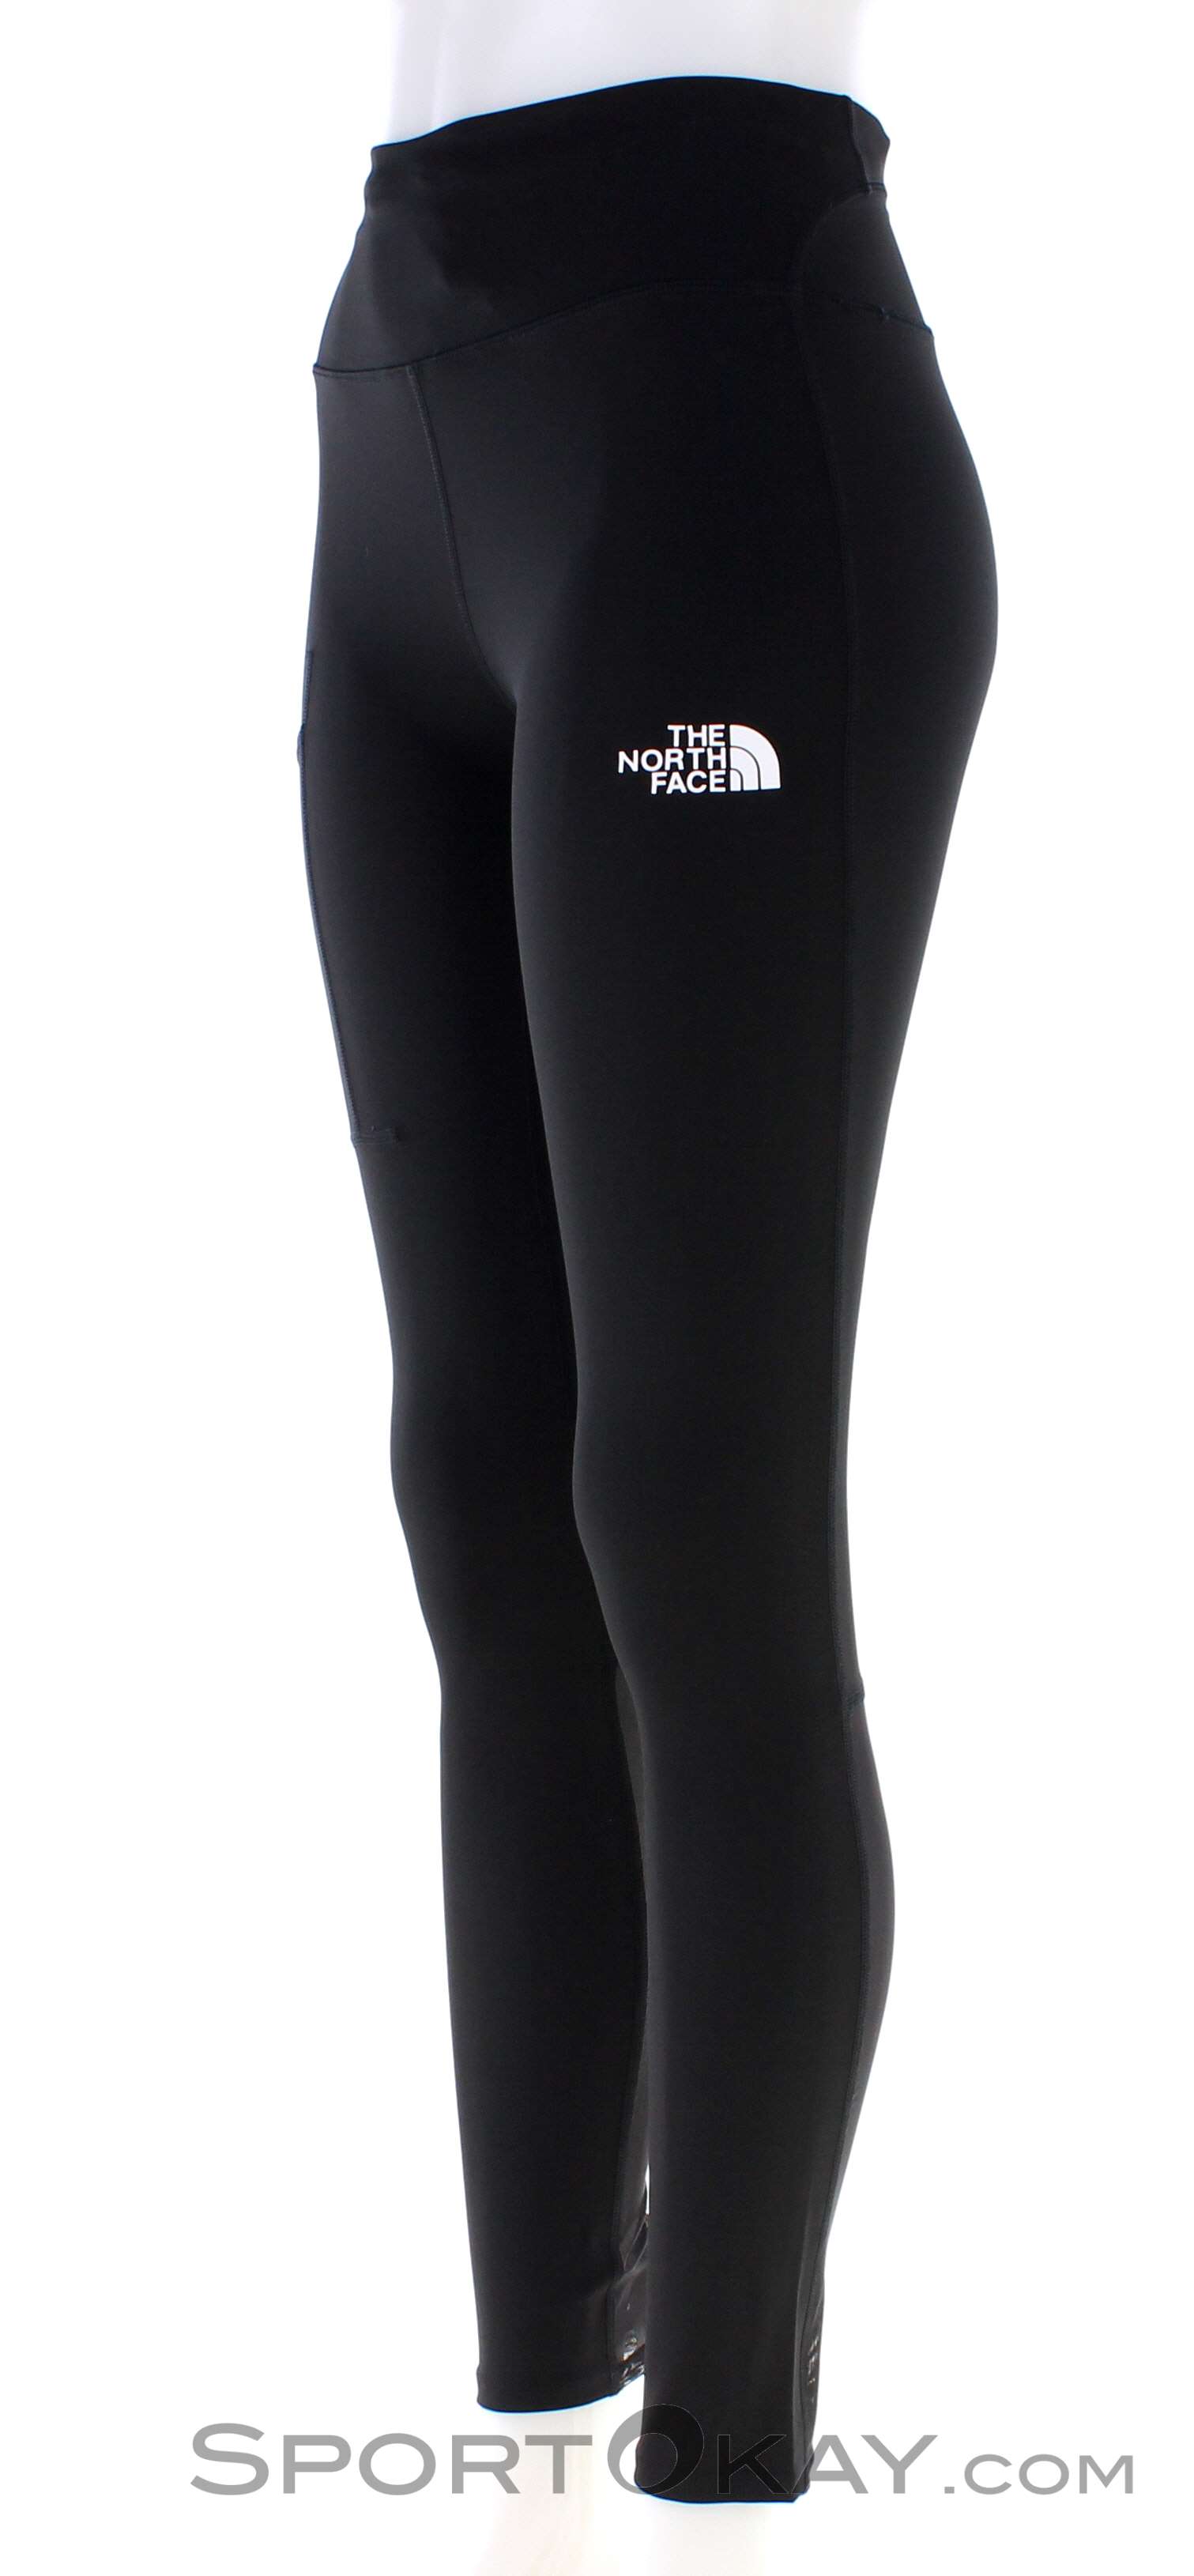 Black Movmynt Leggings by The North Face on Sale